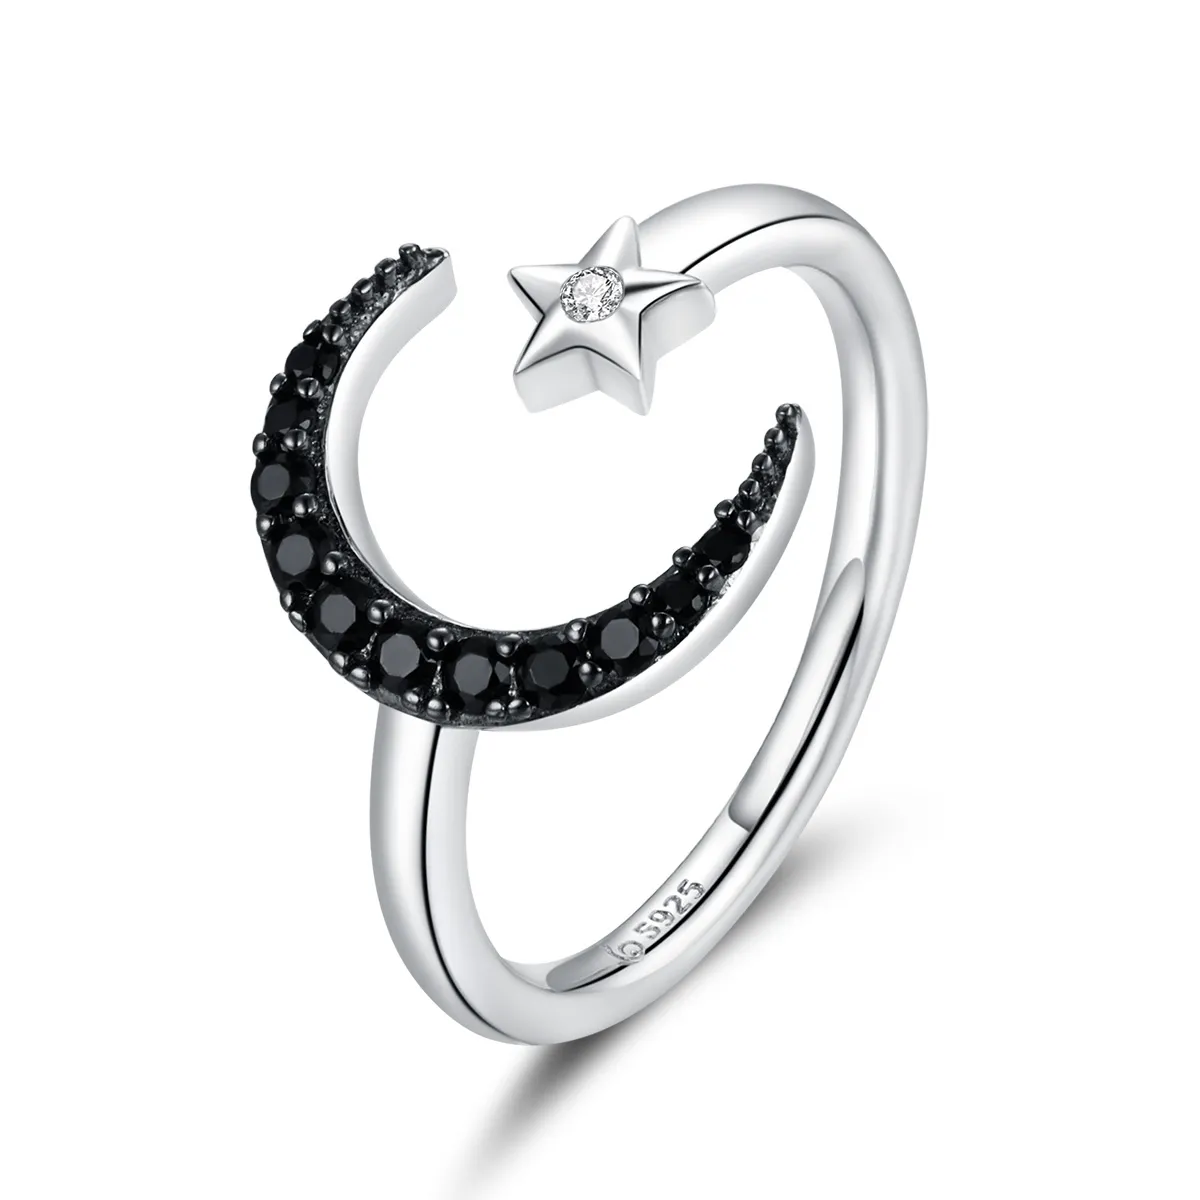 Pandora Style Silver Best Friend Moon And Star Open Ring - BSR137